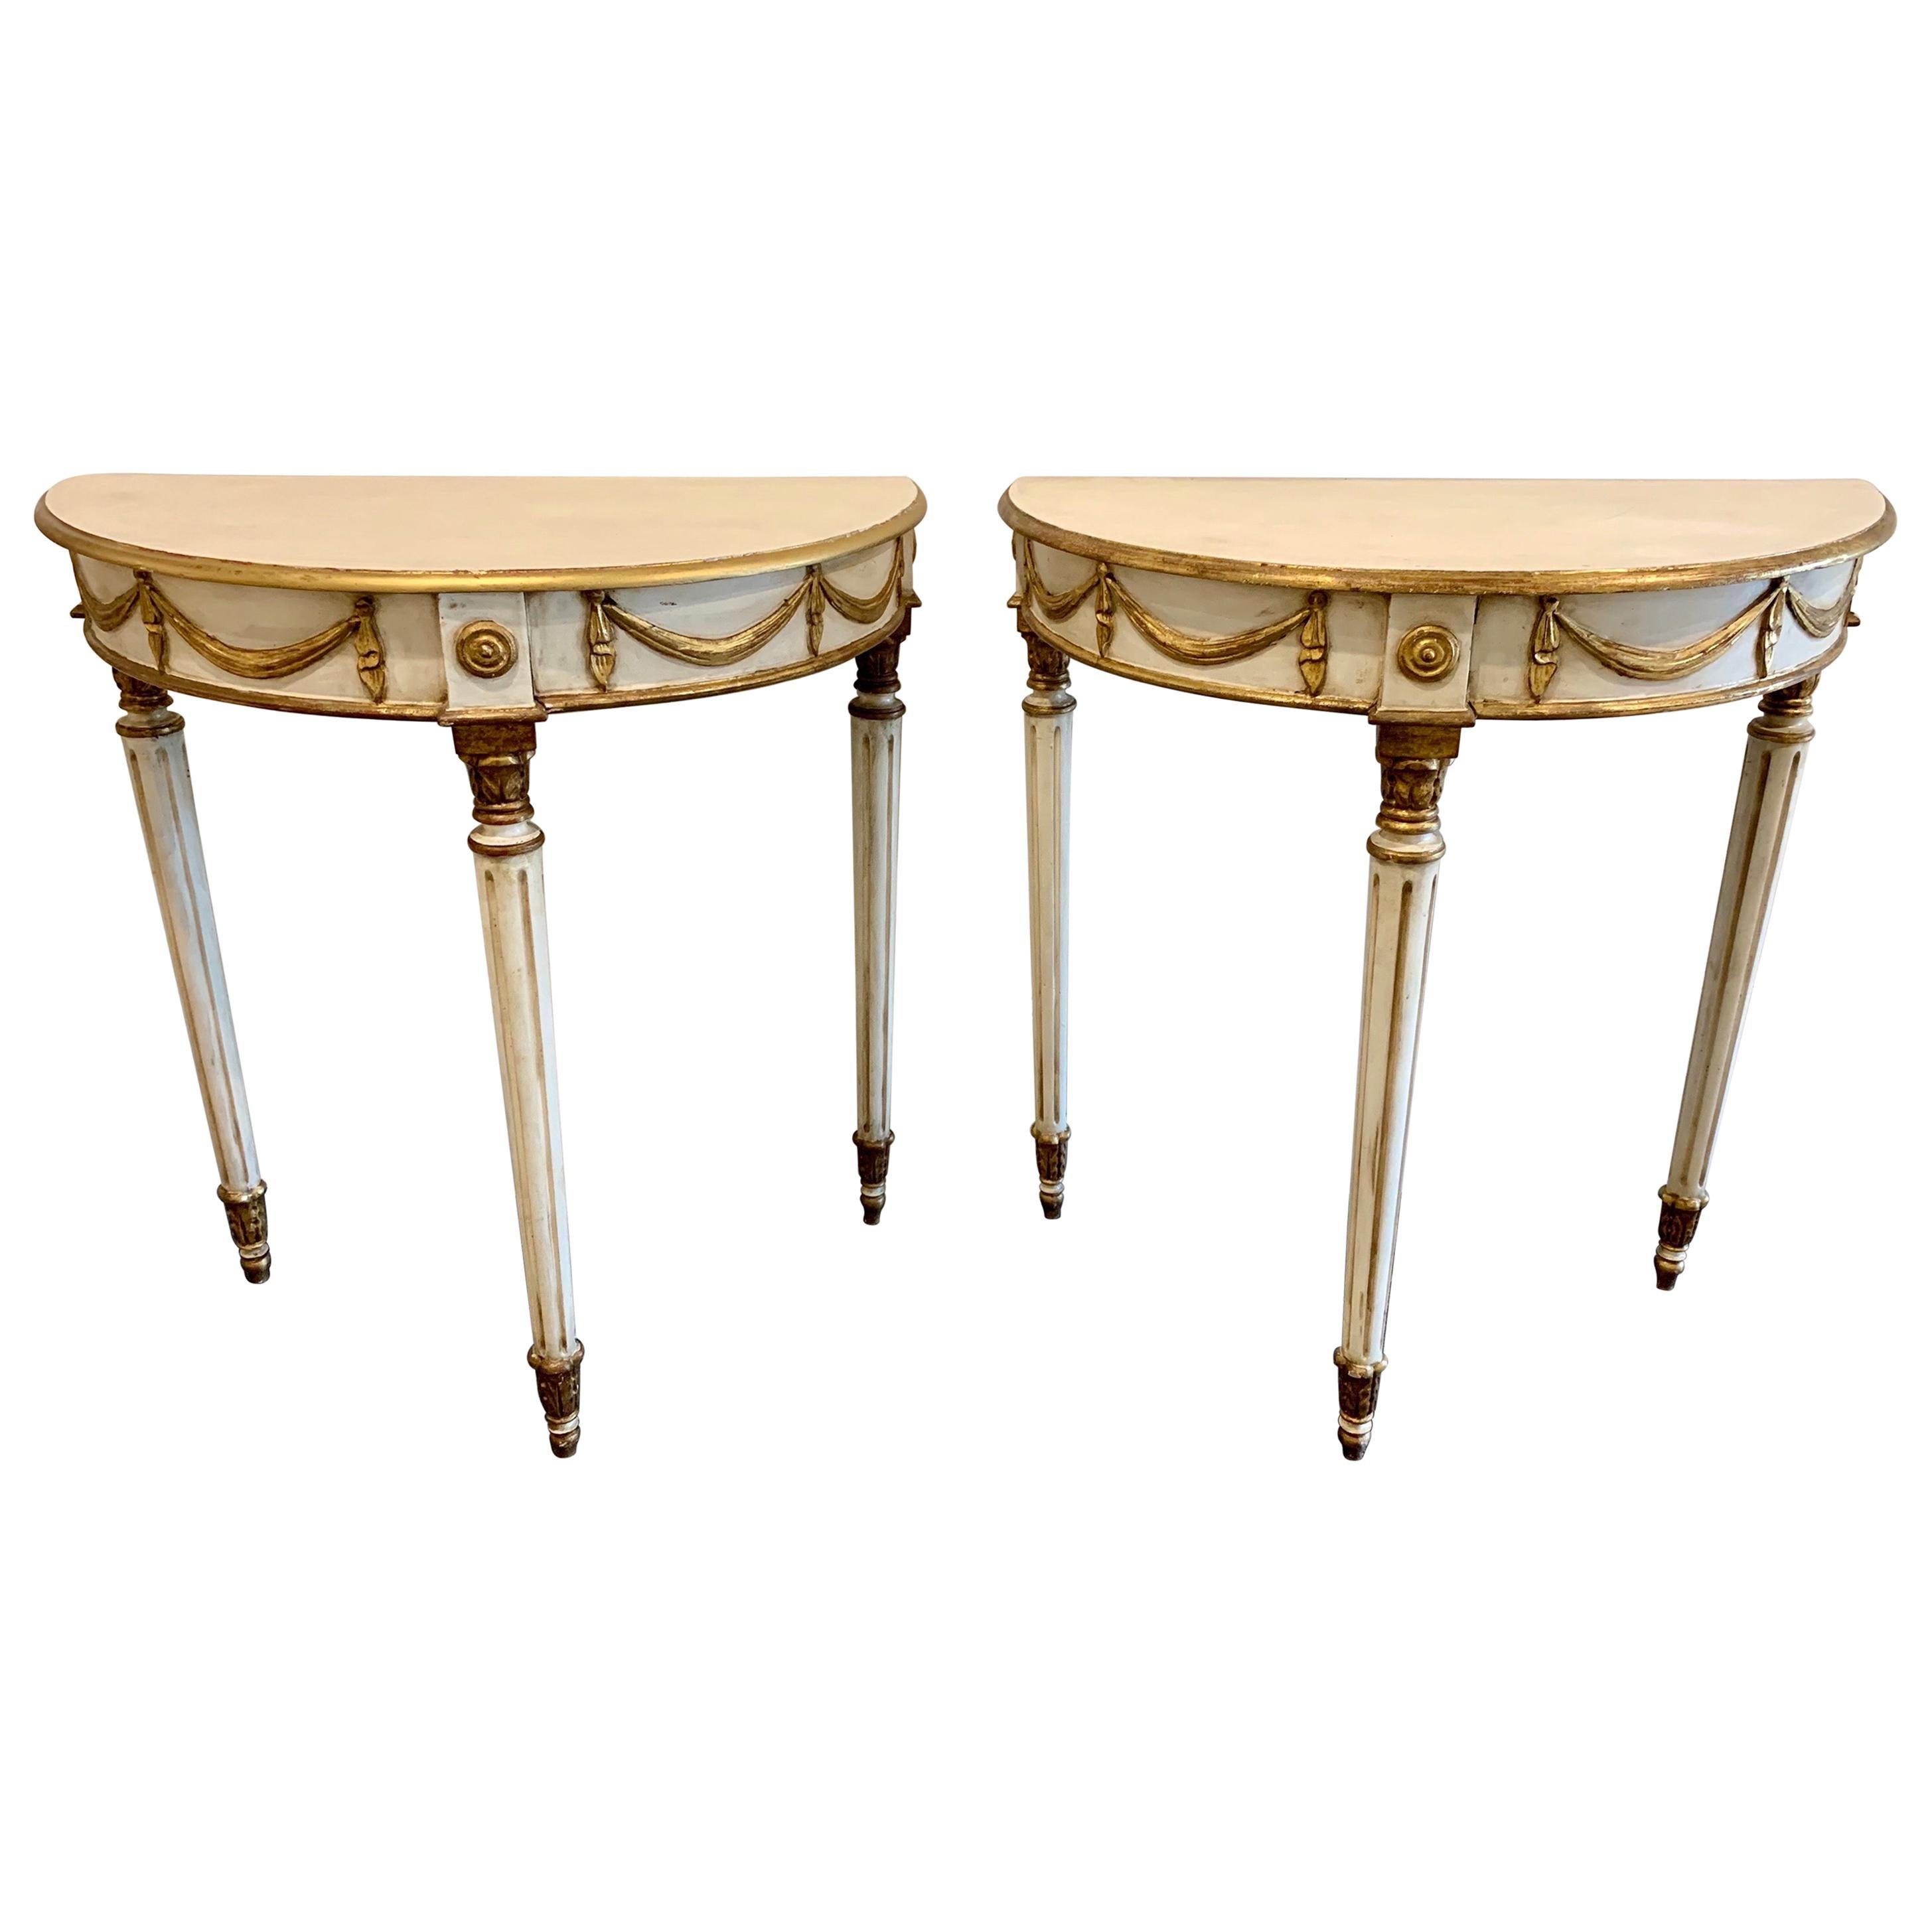 Pair of Early 20th Century Louis XVI Style Parcel-Gilt Side Tables